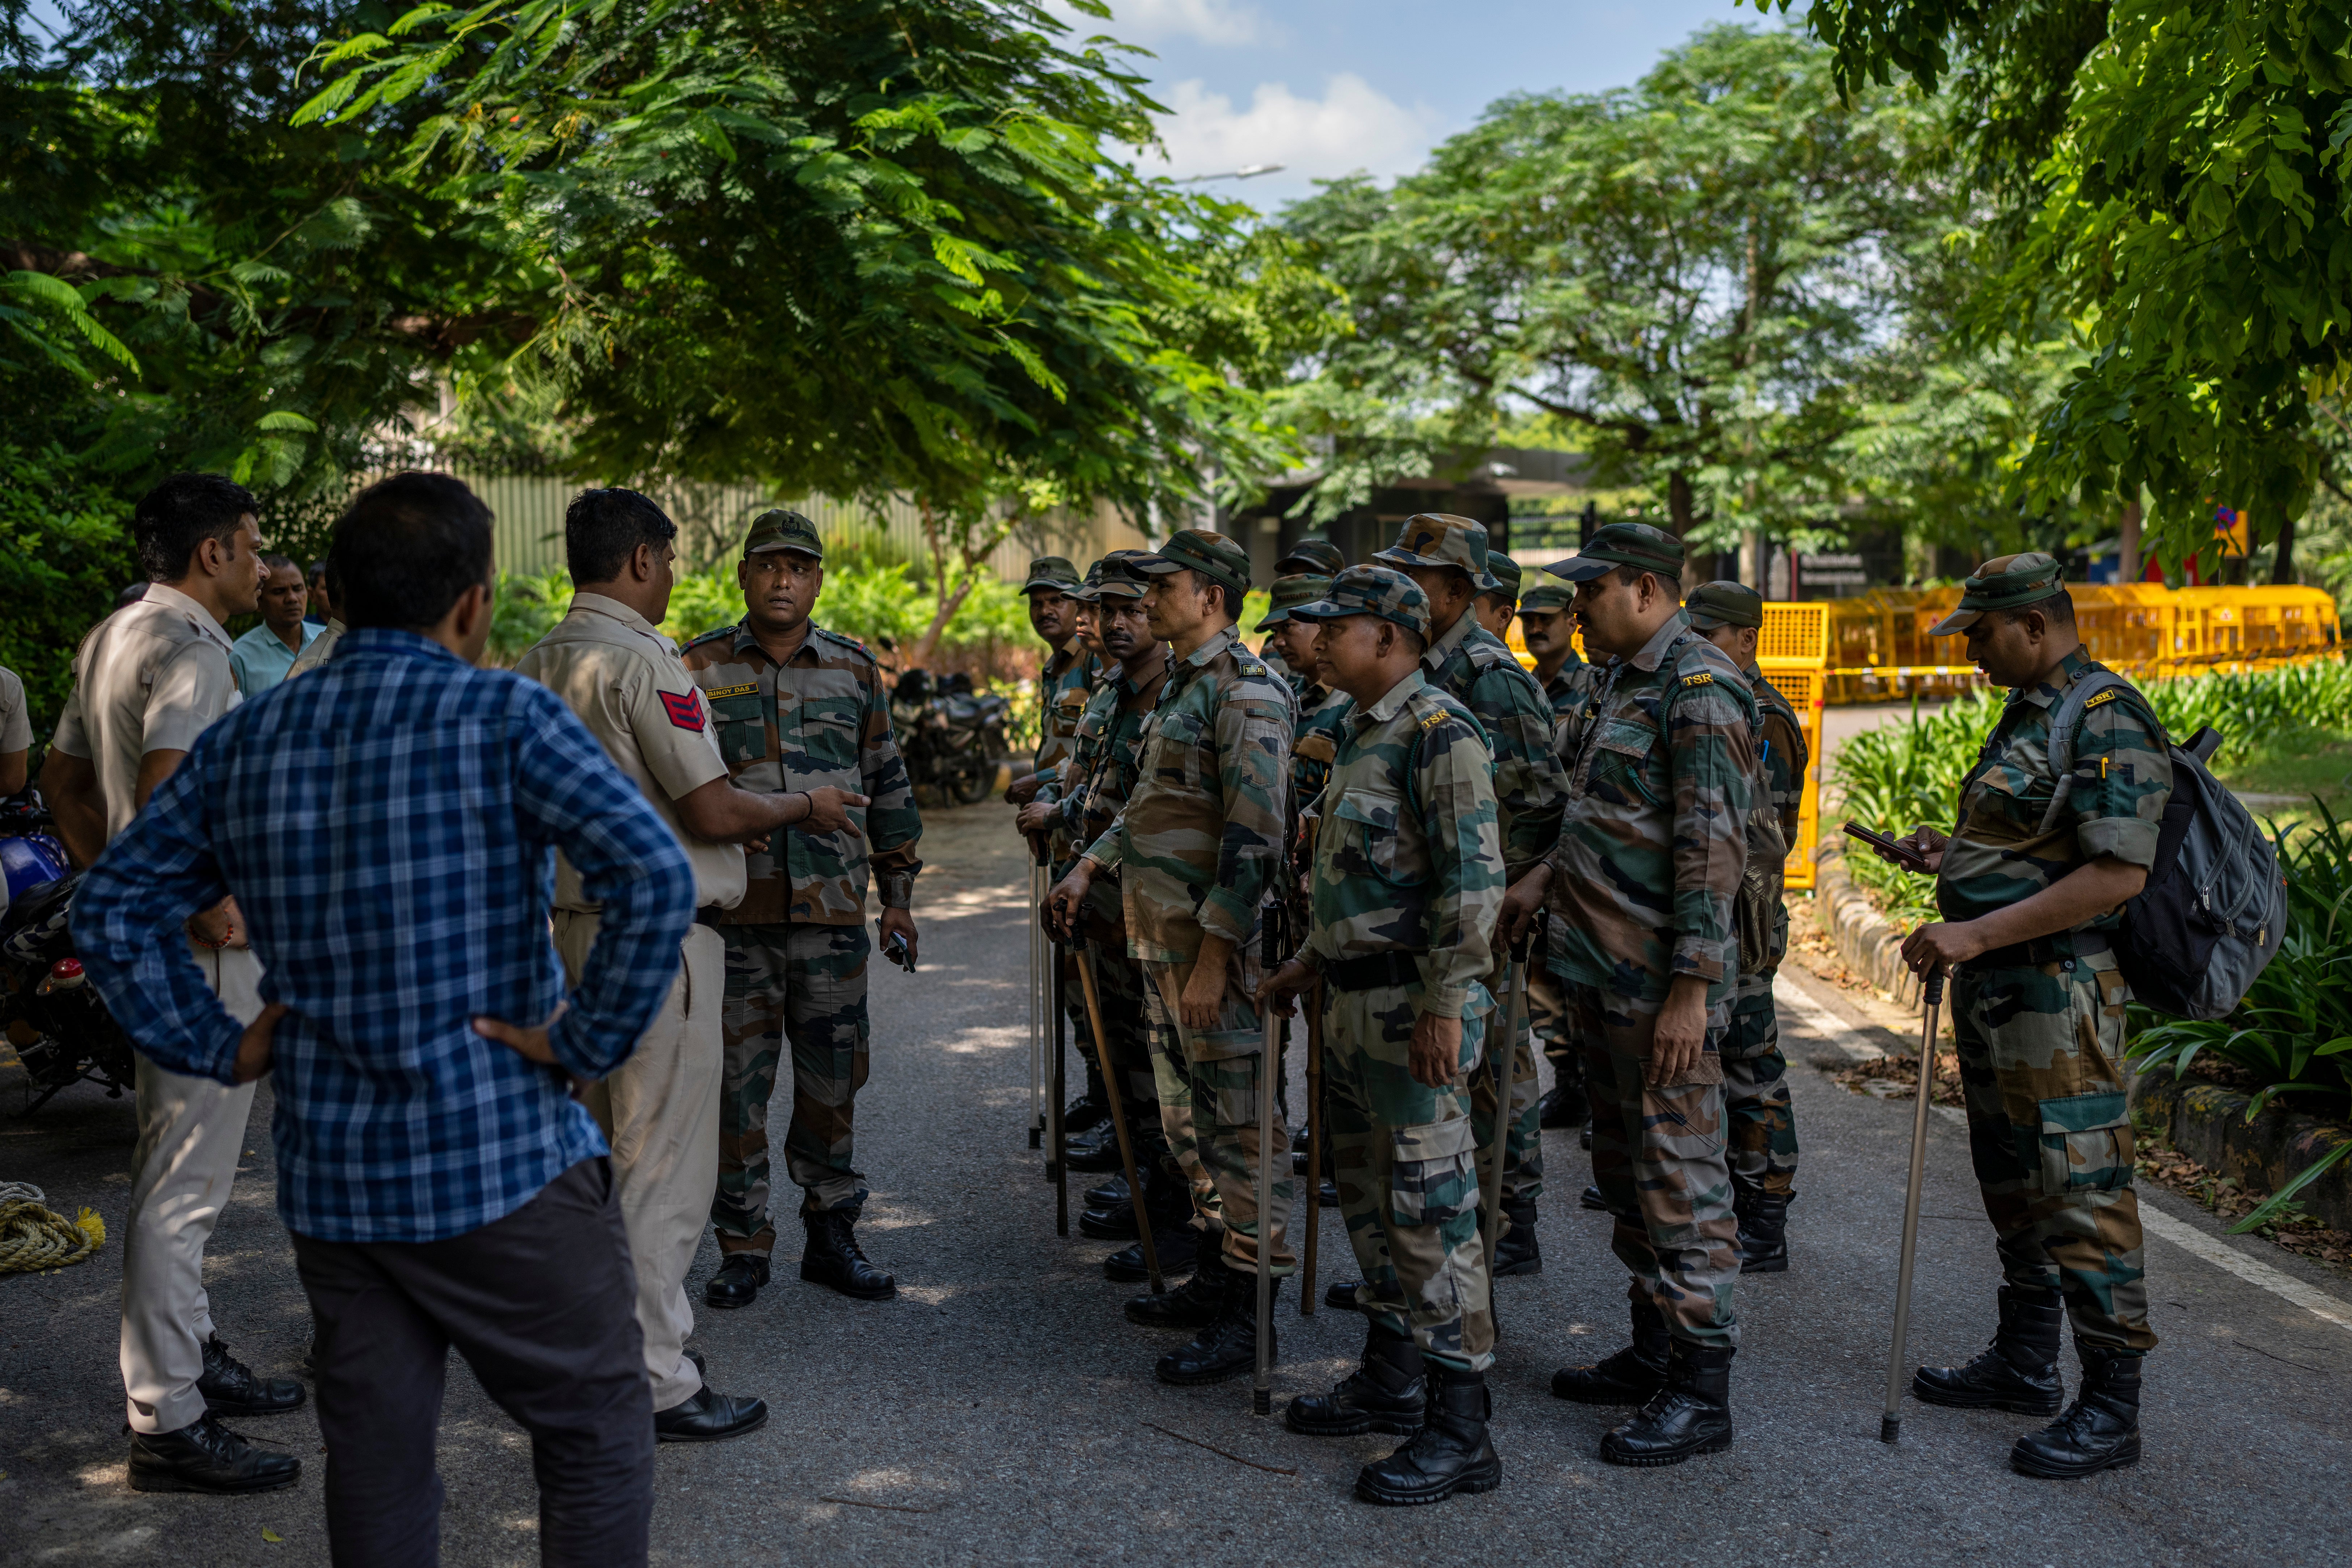 A Delhi police officer briefs a group of Indian paramilitary soldiers outside the Canadian High Commission in Delhi